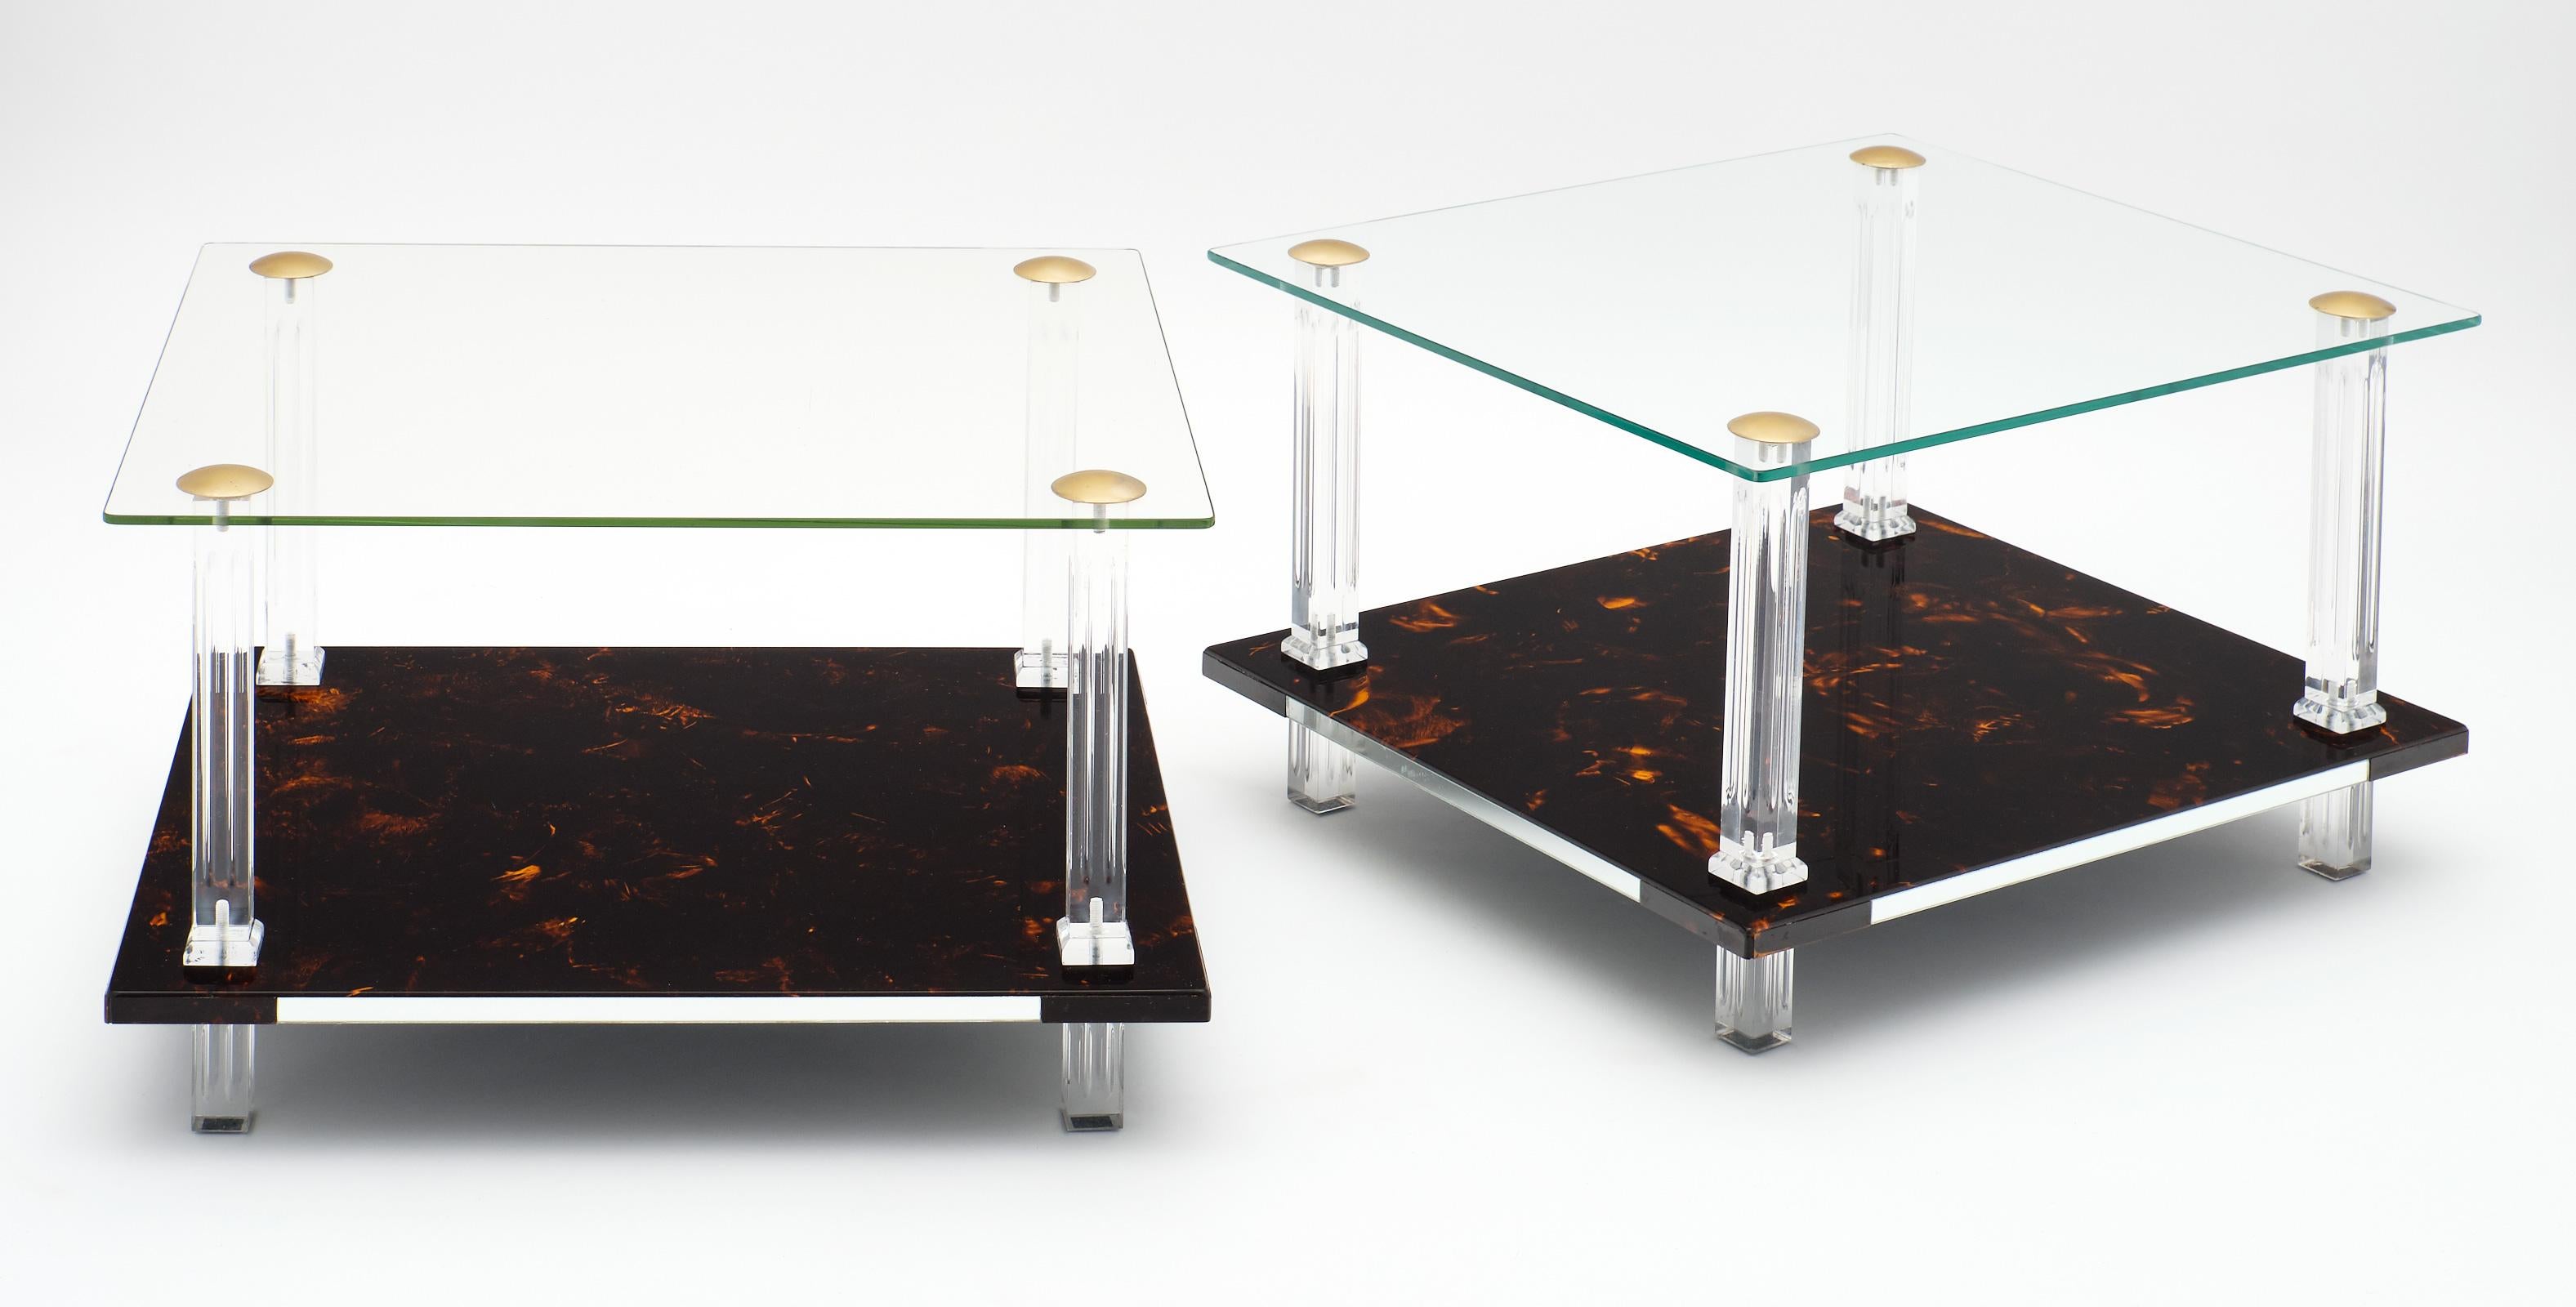 A fine French pair of modernist side tables featuring a lower shelf of “altuglass” and a glass top. The shelves are supported by four Lucite legs with brass hardware.